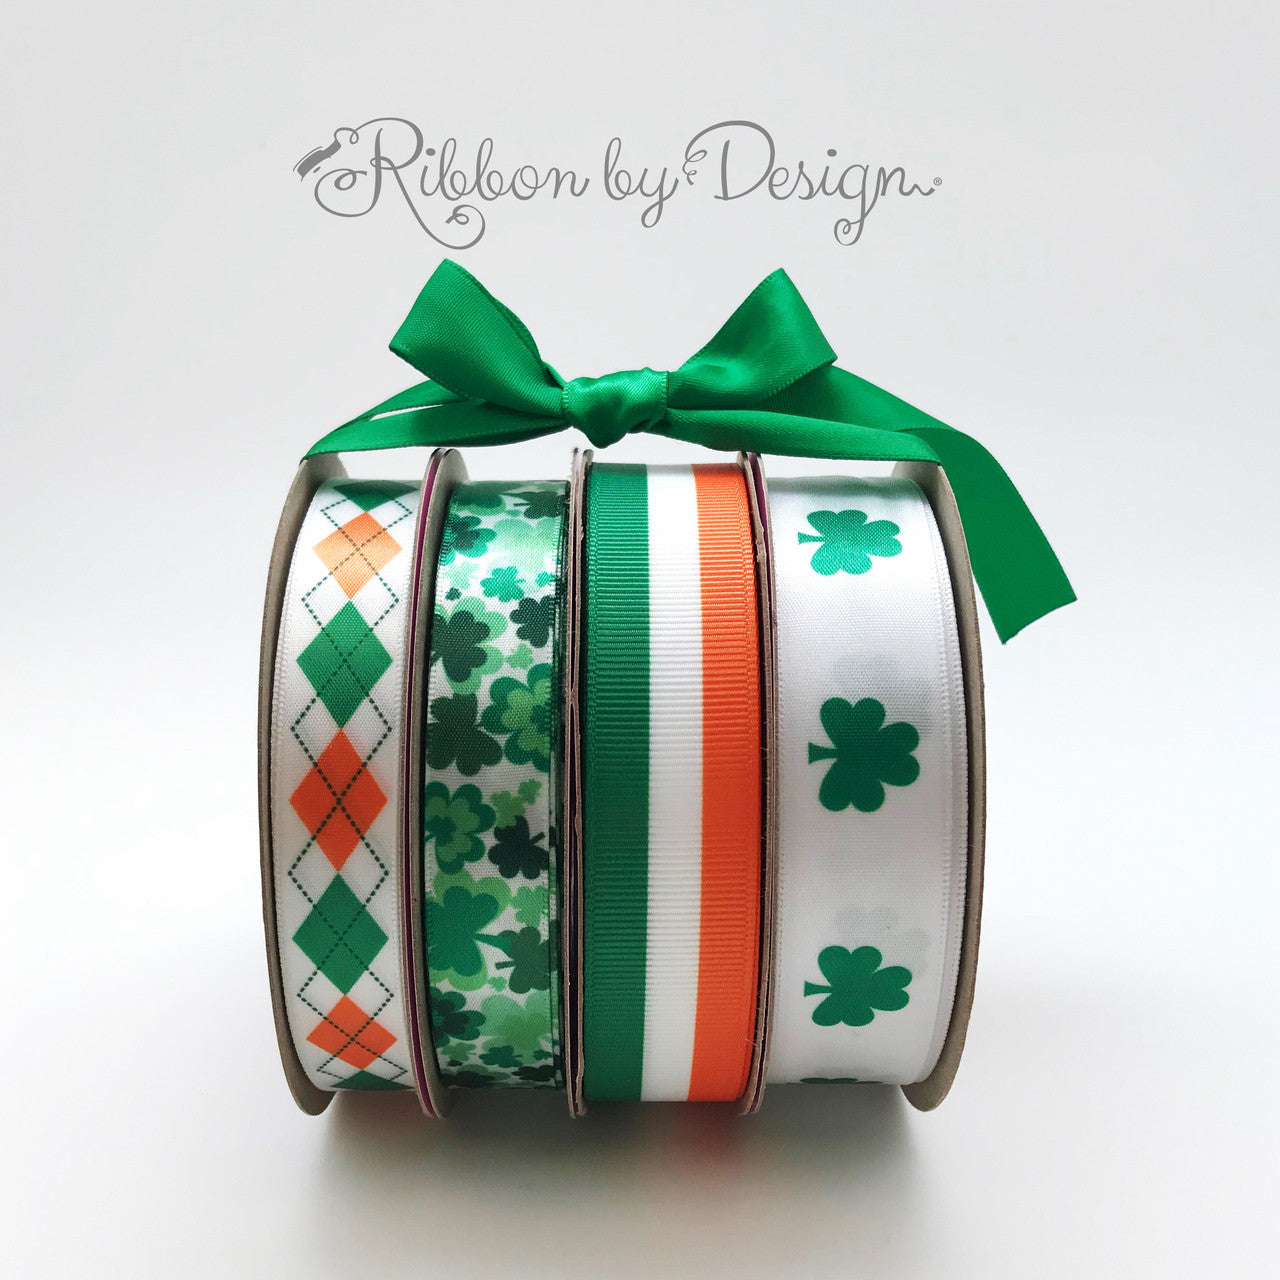 Our St. Patricks Day argyle pairs beautifully with the rest of our Irish collection! Mix and match for a fun St. Patricks Day Celebrations.